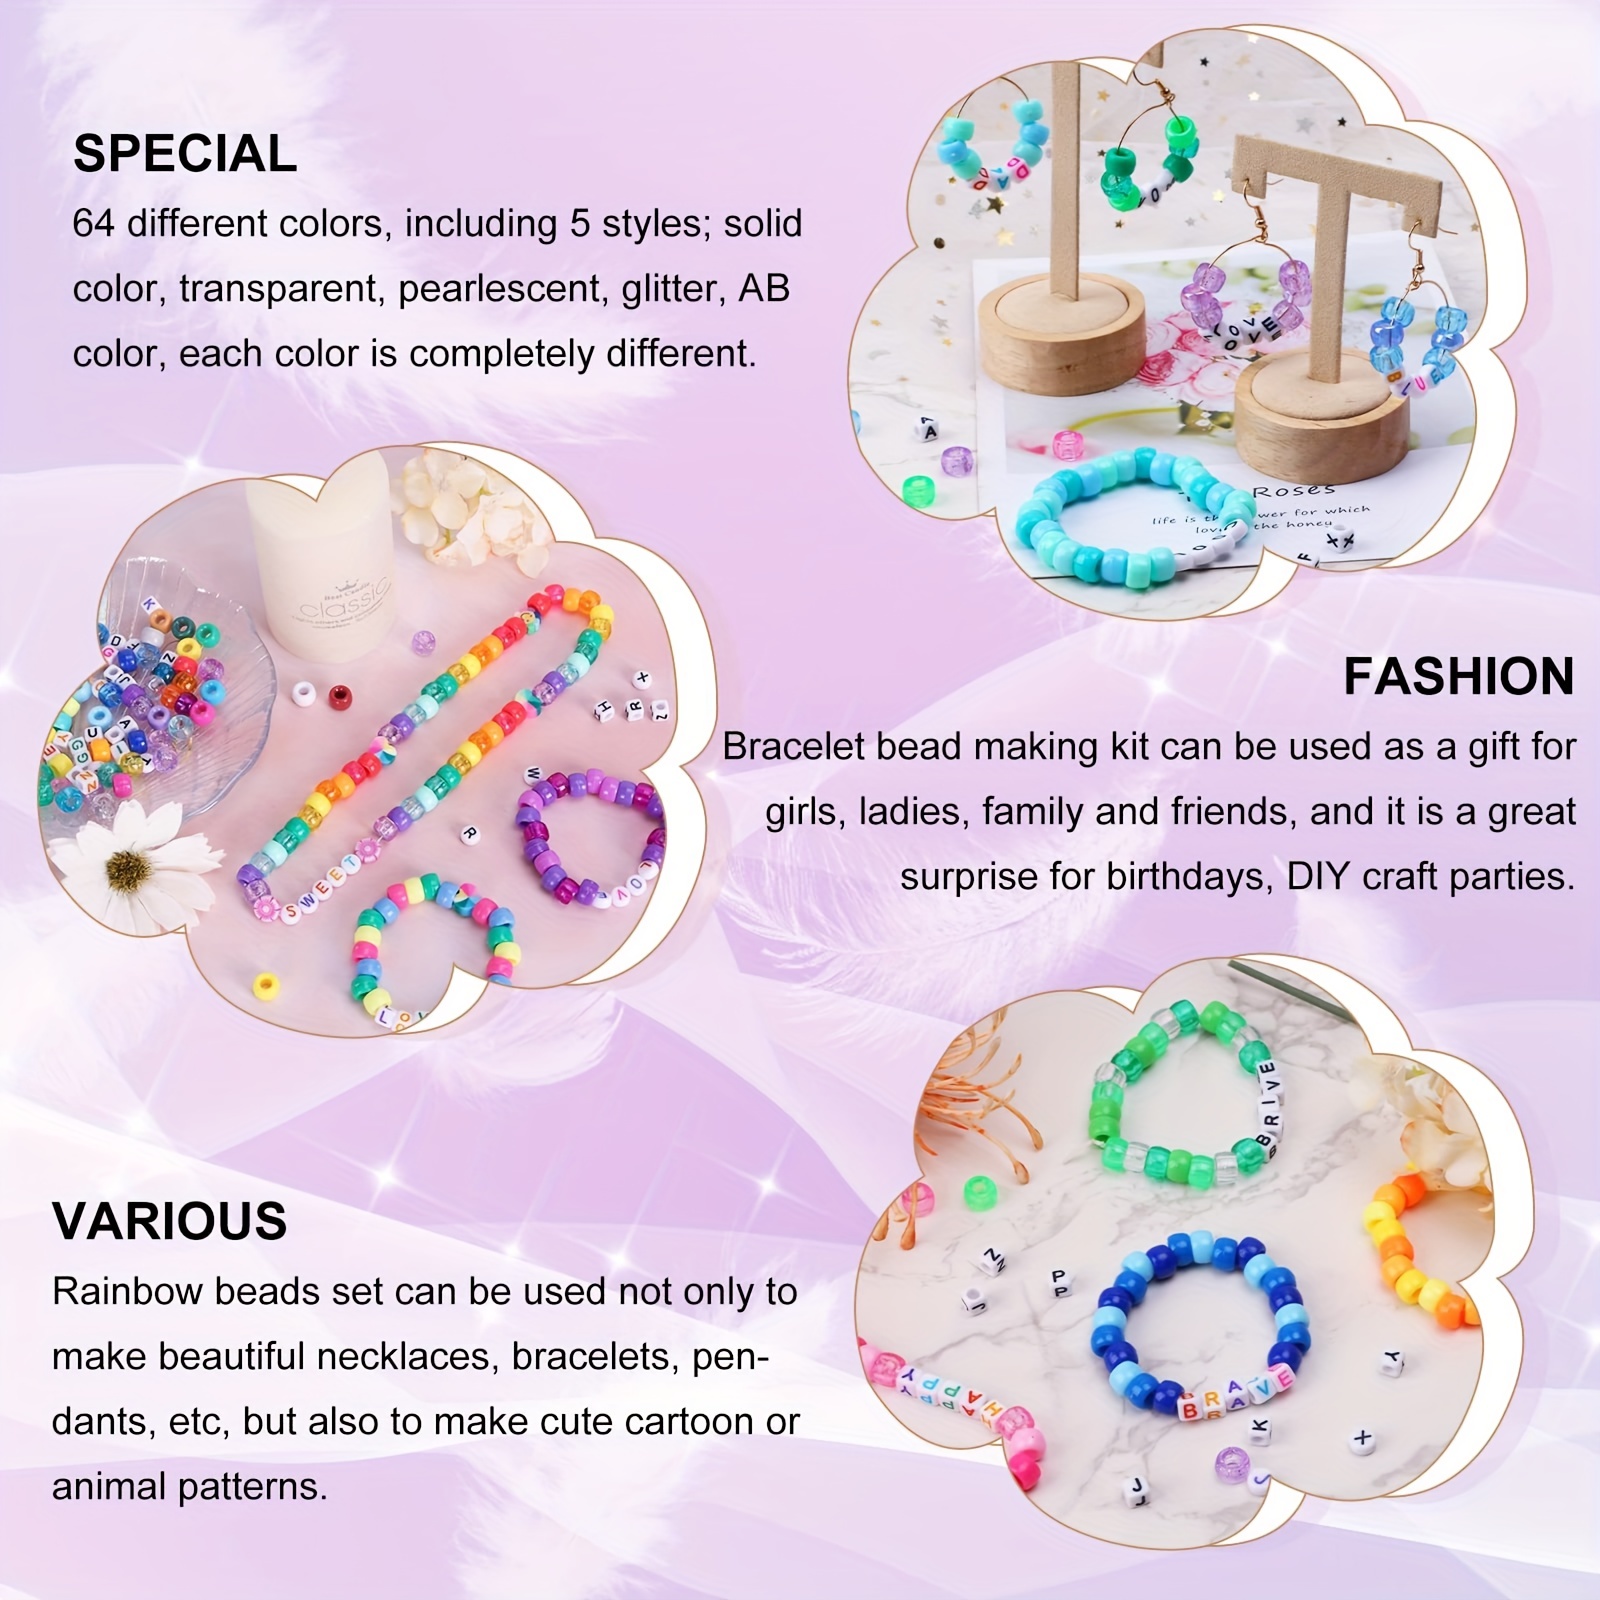 Add a Bead Bracelet Making Activity to Your Next Party or Event - Pony Bead  Store